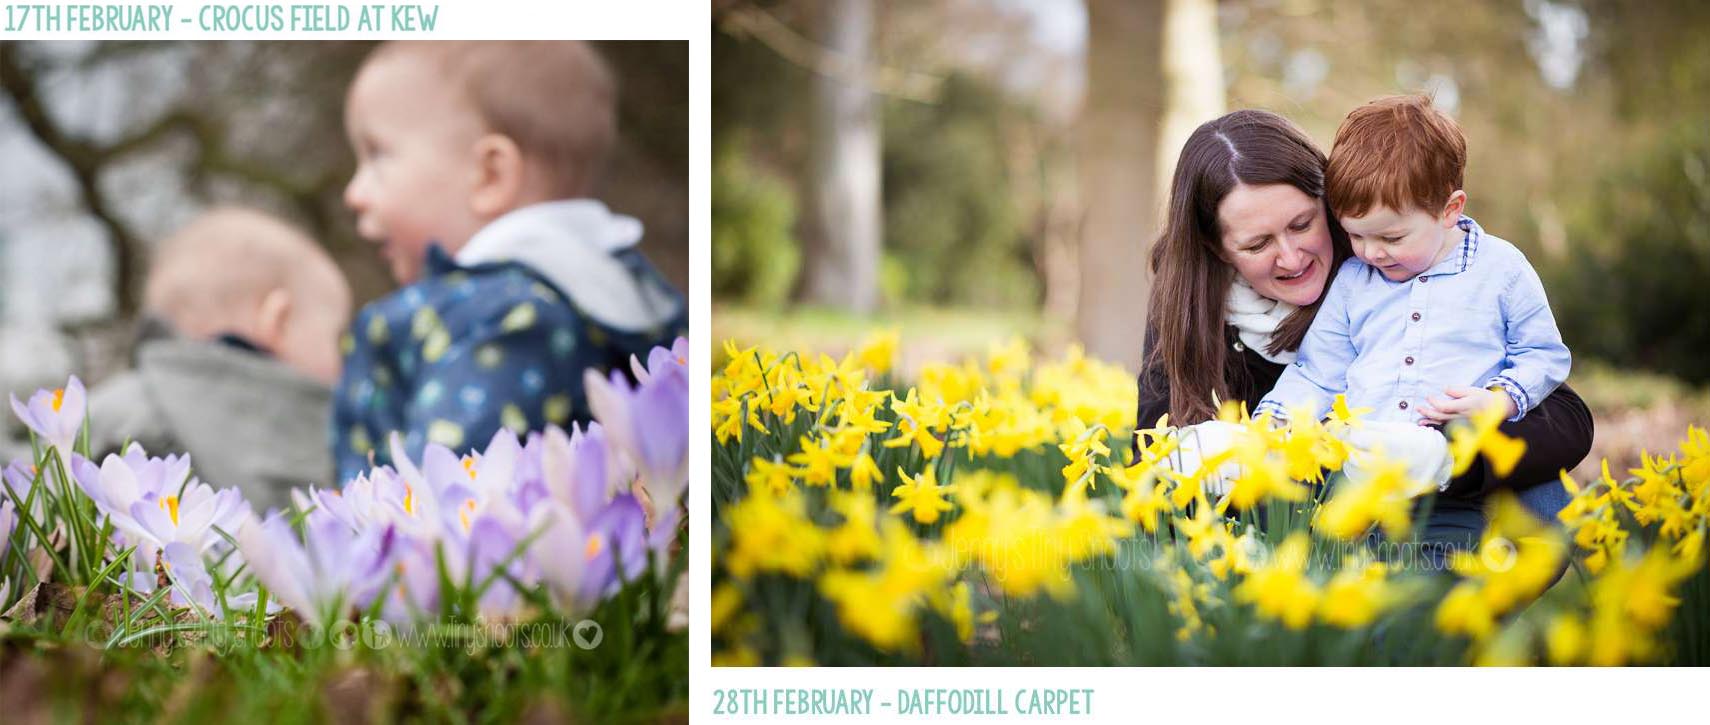 February baby photos with crocus and daffodils